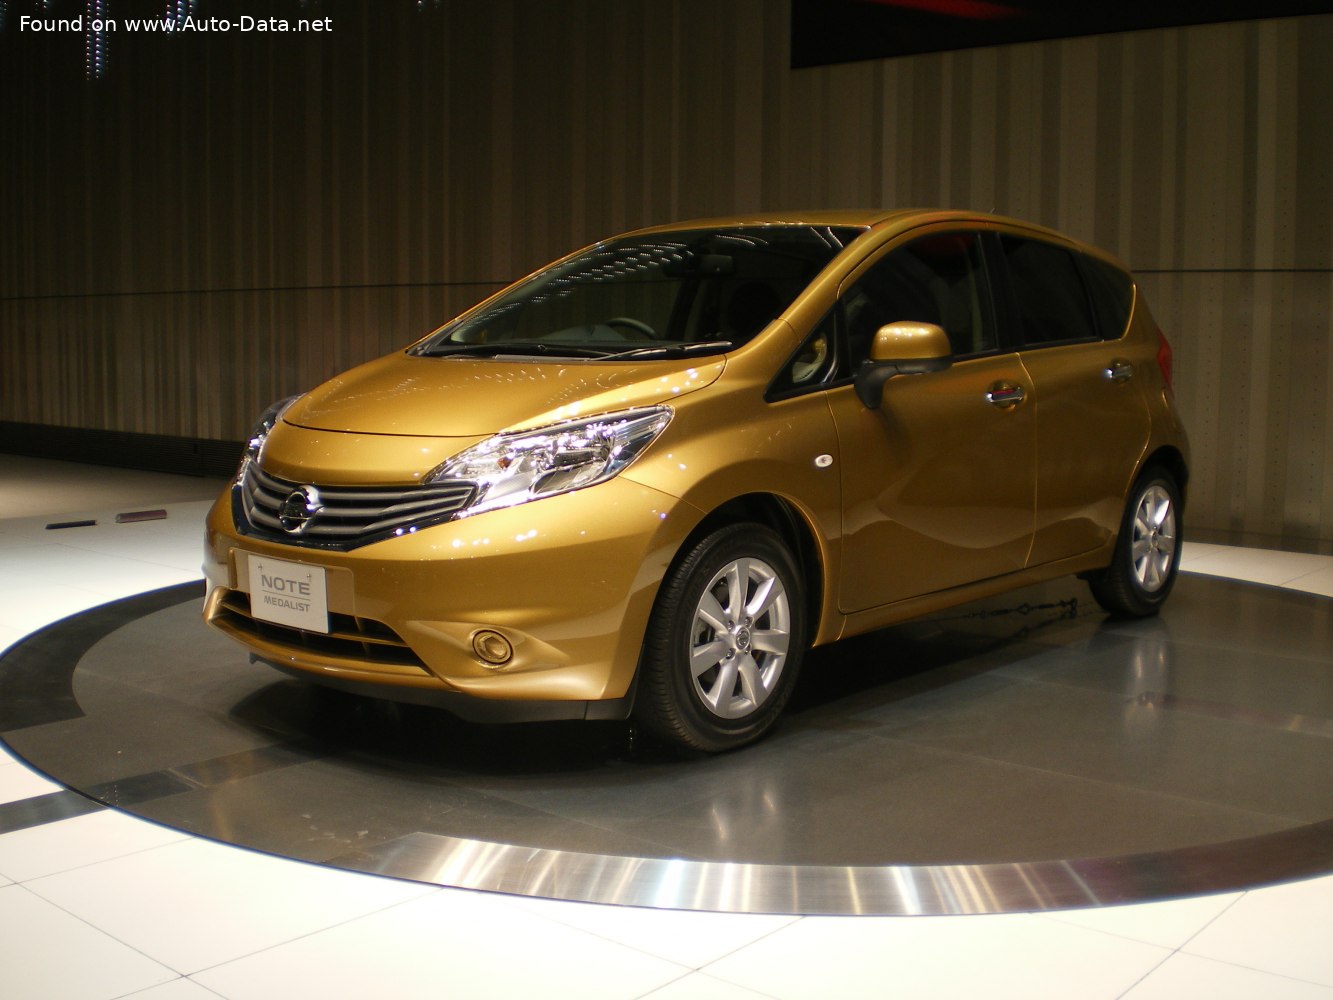 Nissan Note 2 (01-Serie)